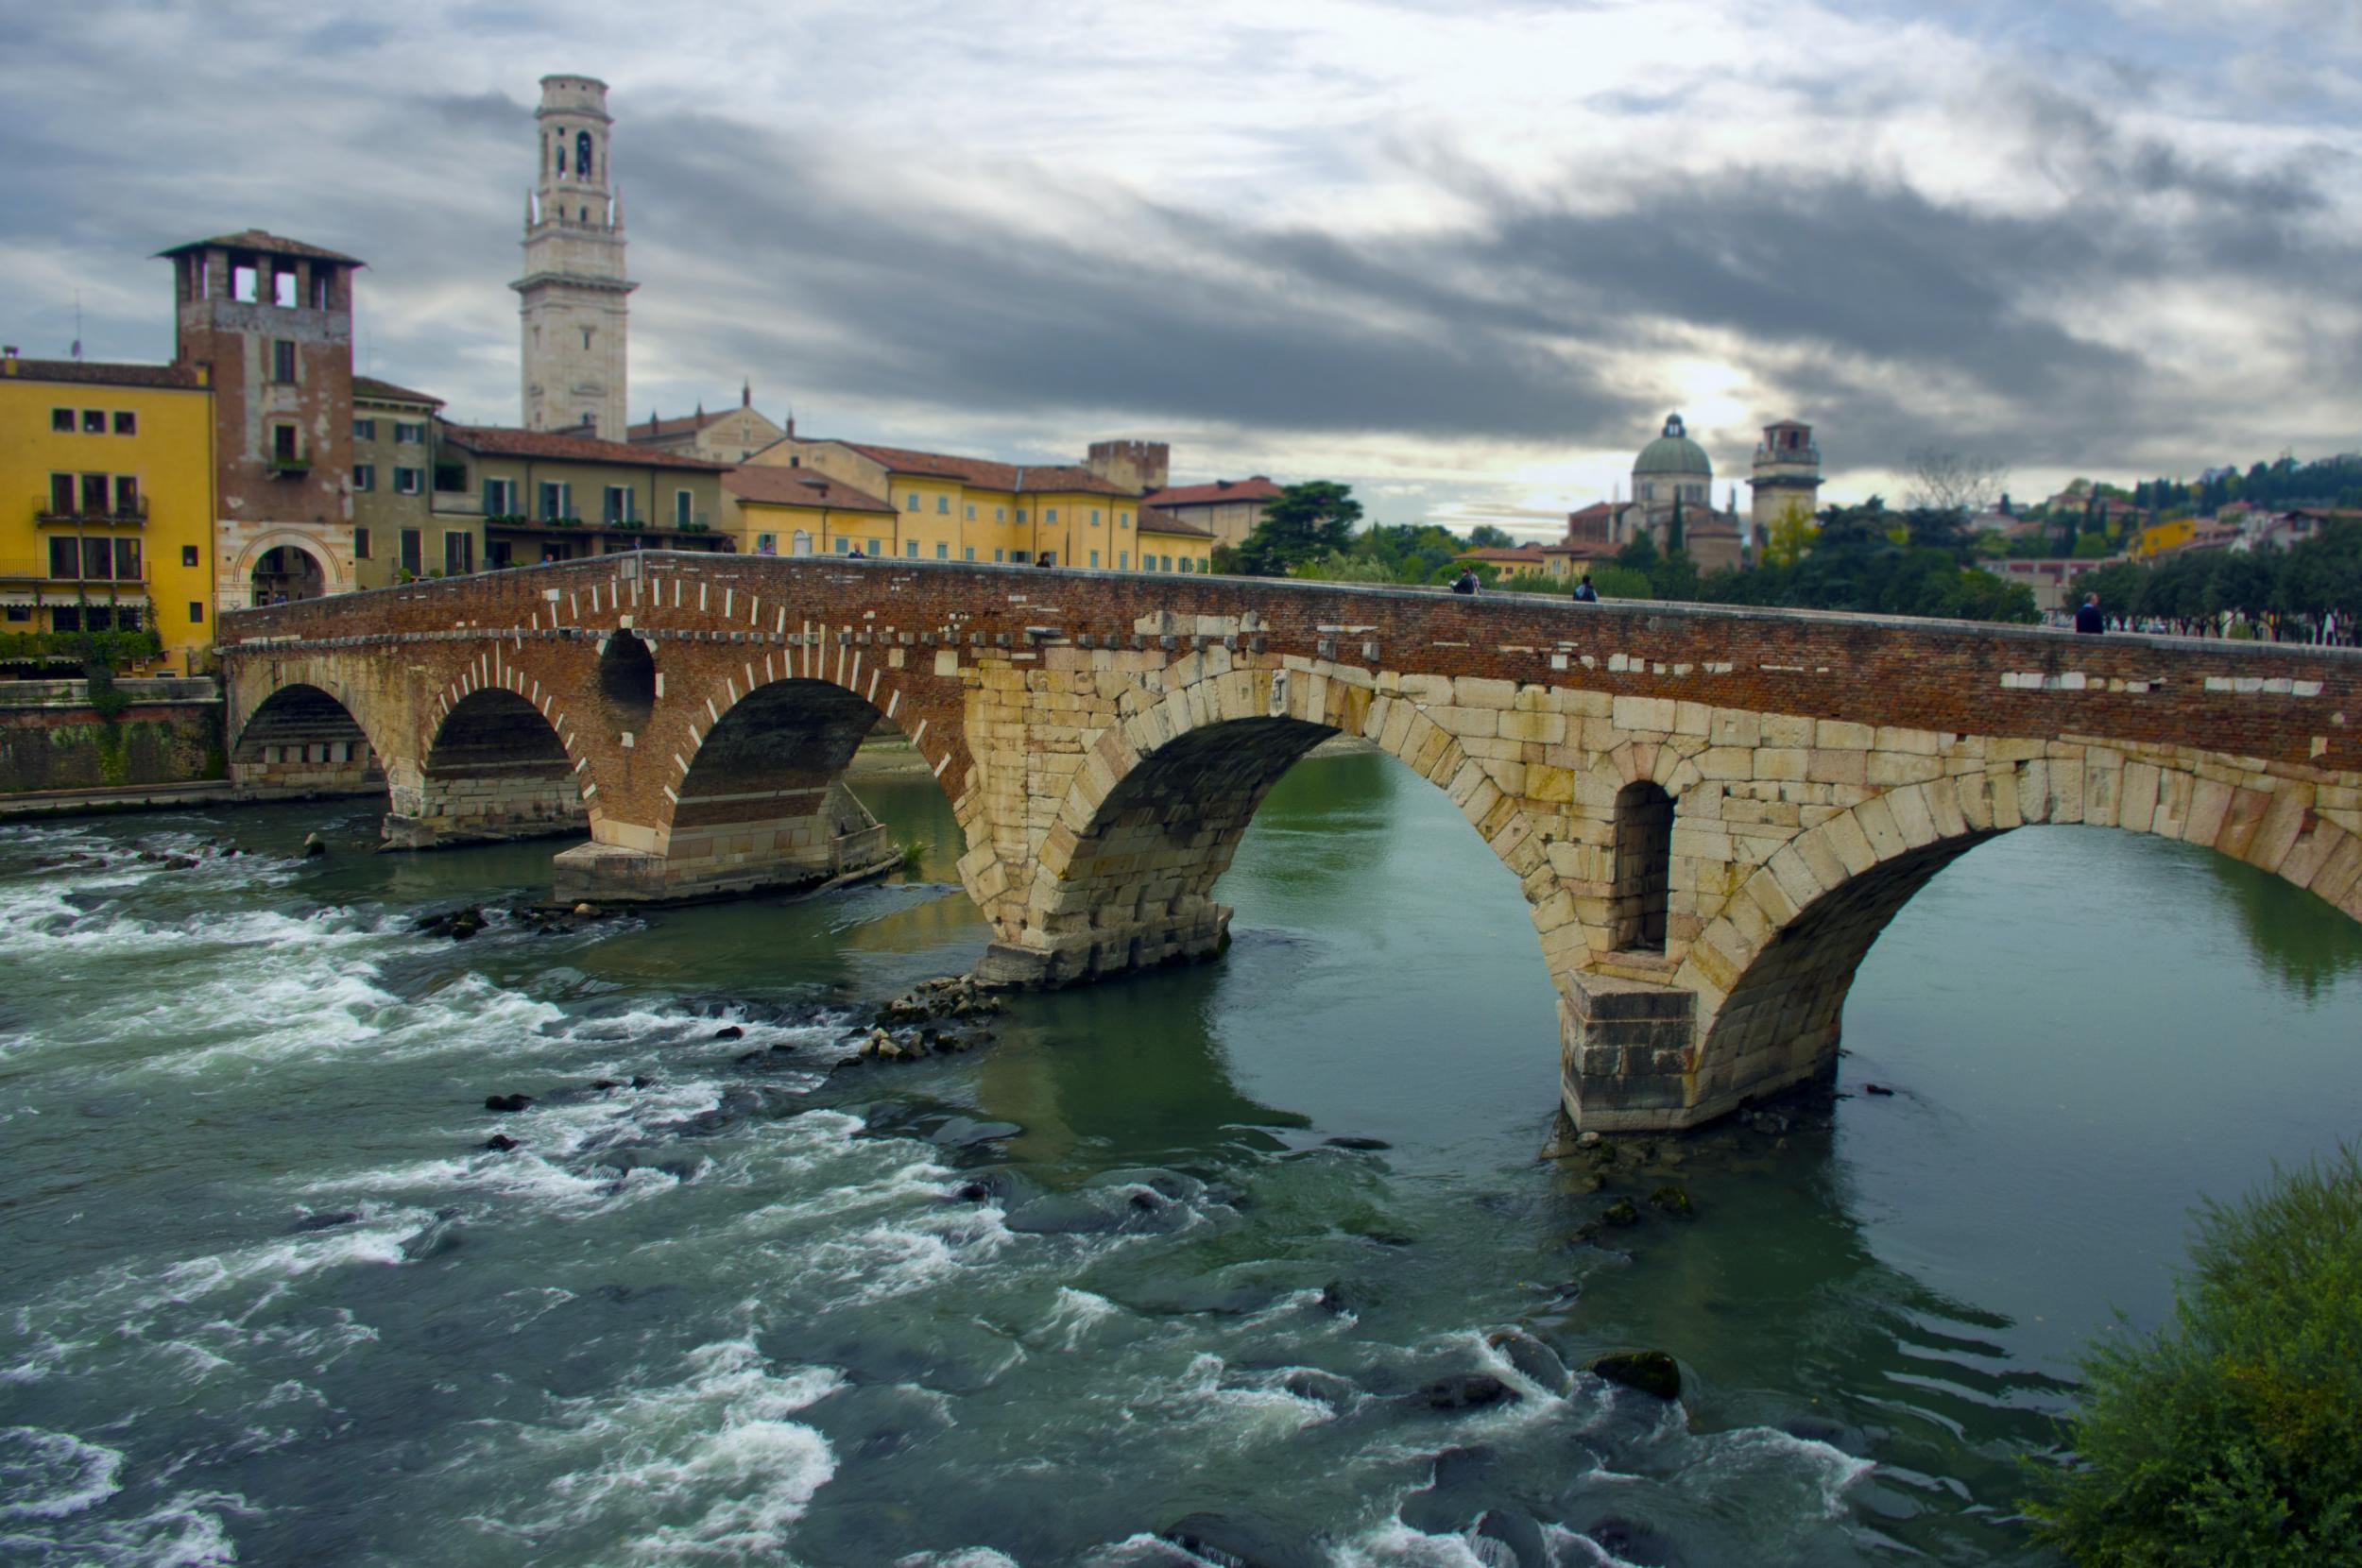 The Ponte Pietra was built in the first century BC